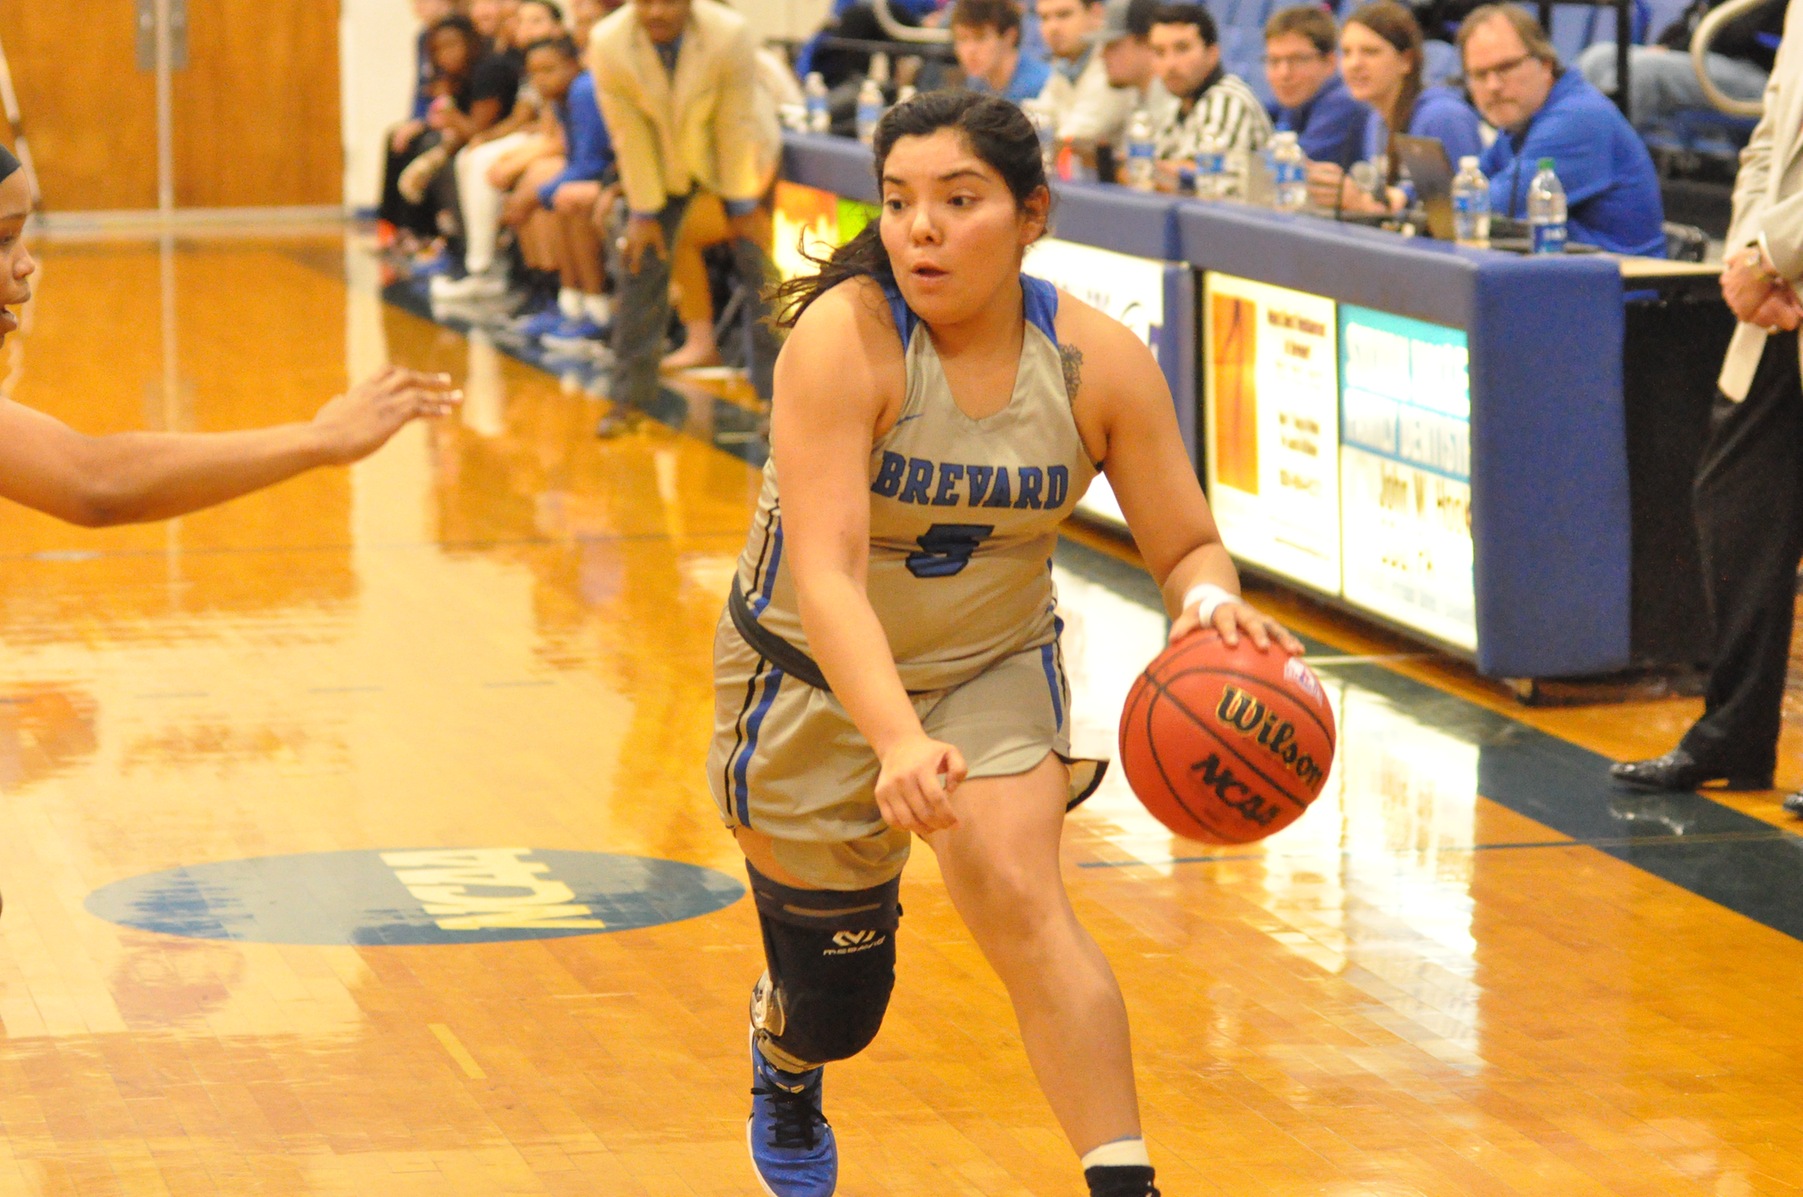 Taryn Ledford scored 13 points and made three 3-pointers off the bench to help Brevard defeat LaGrange, 65-54, on the road (Photo courtesy of Tommy Moss).